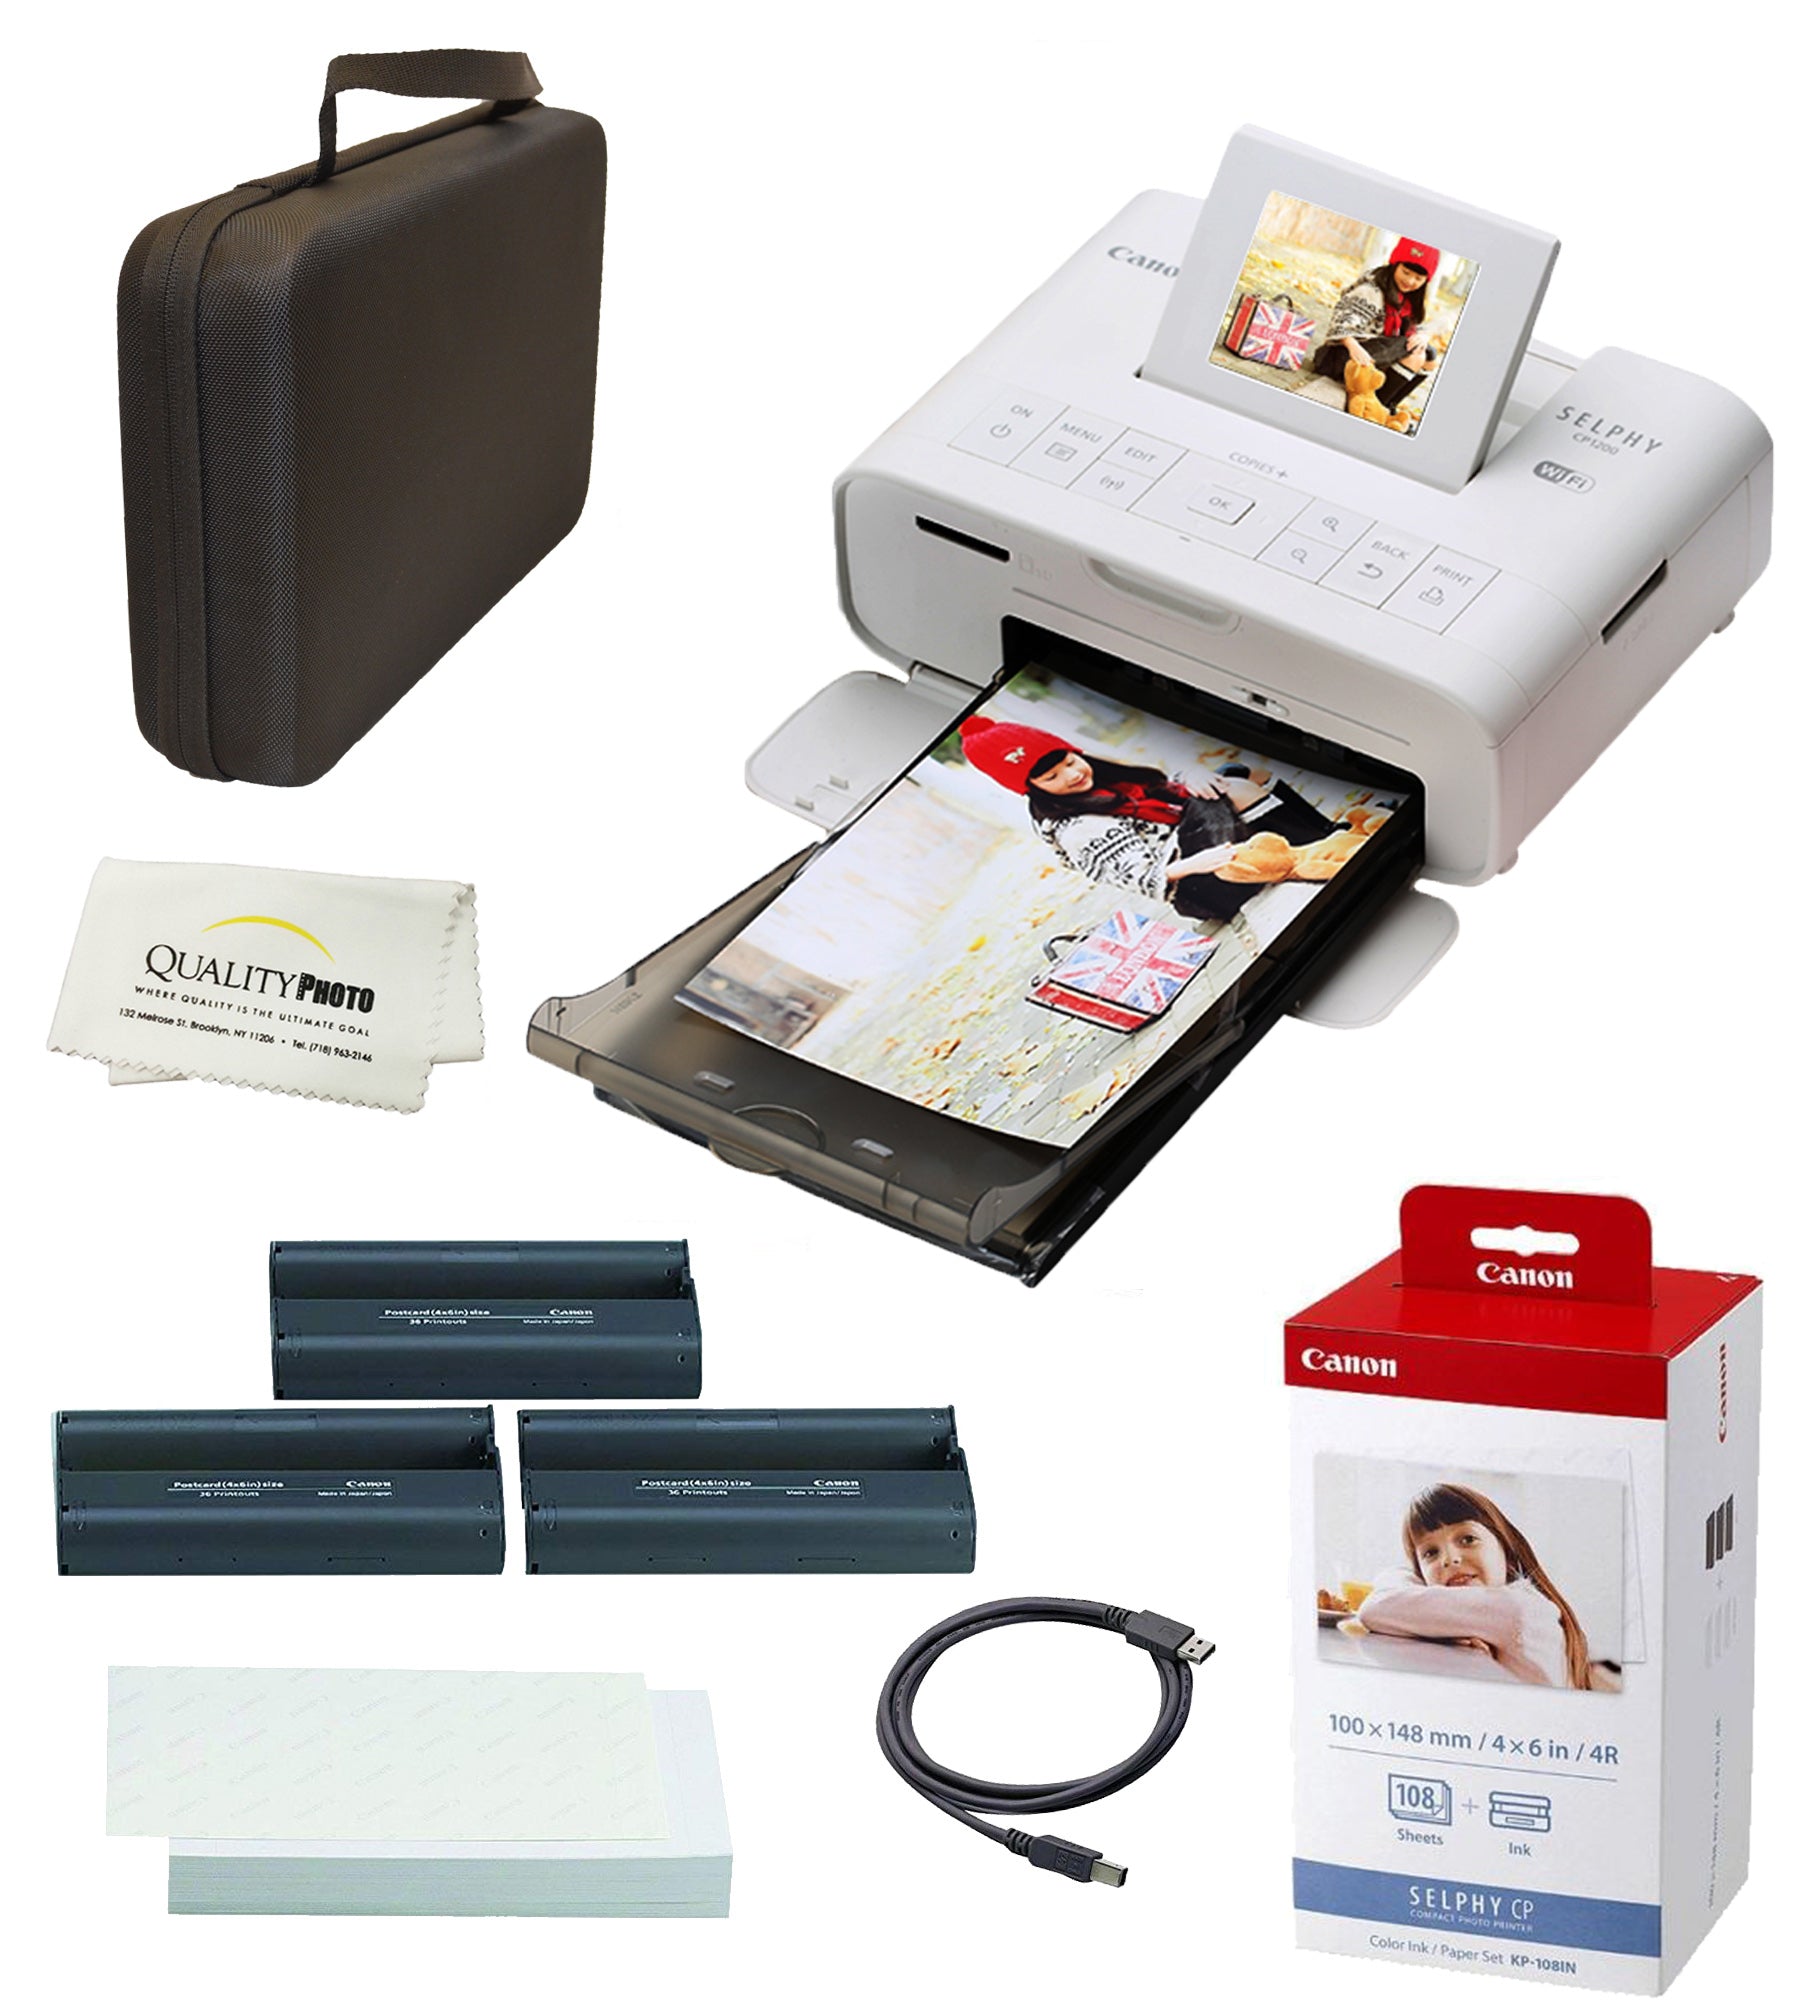 Støv fløde Forfølge Canon SELPHY CP1300 Wireless Compact Photo Printer with AirPrint and M –  QUALITY PHOTO